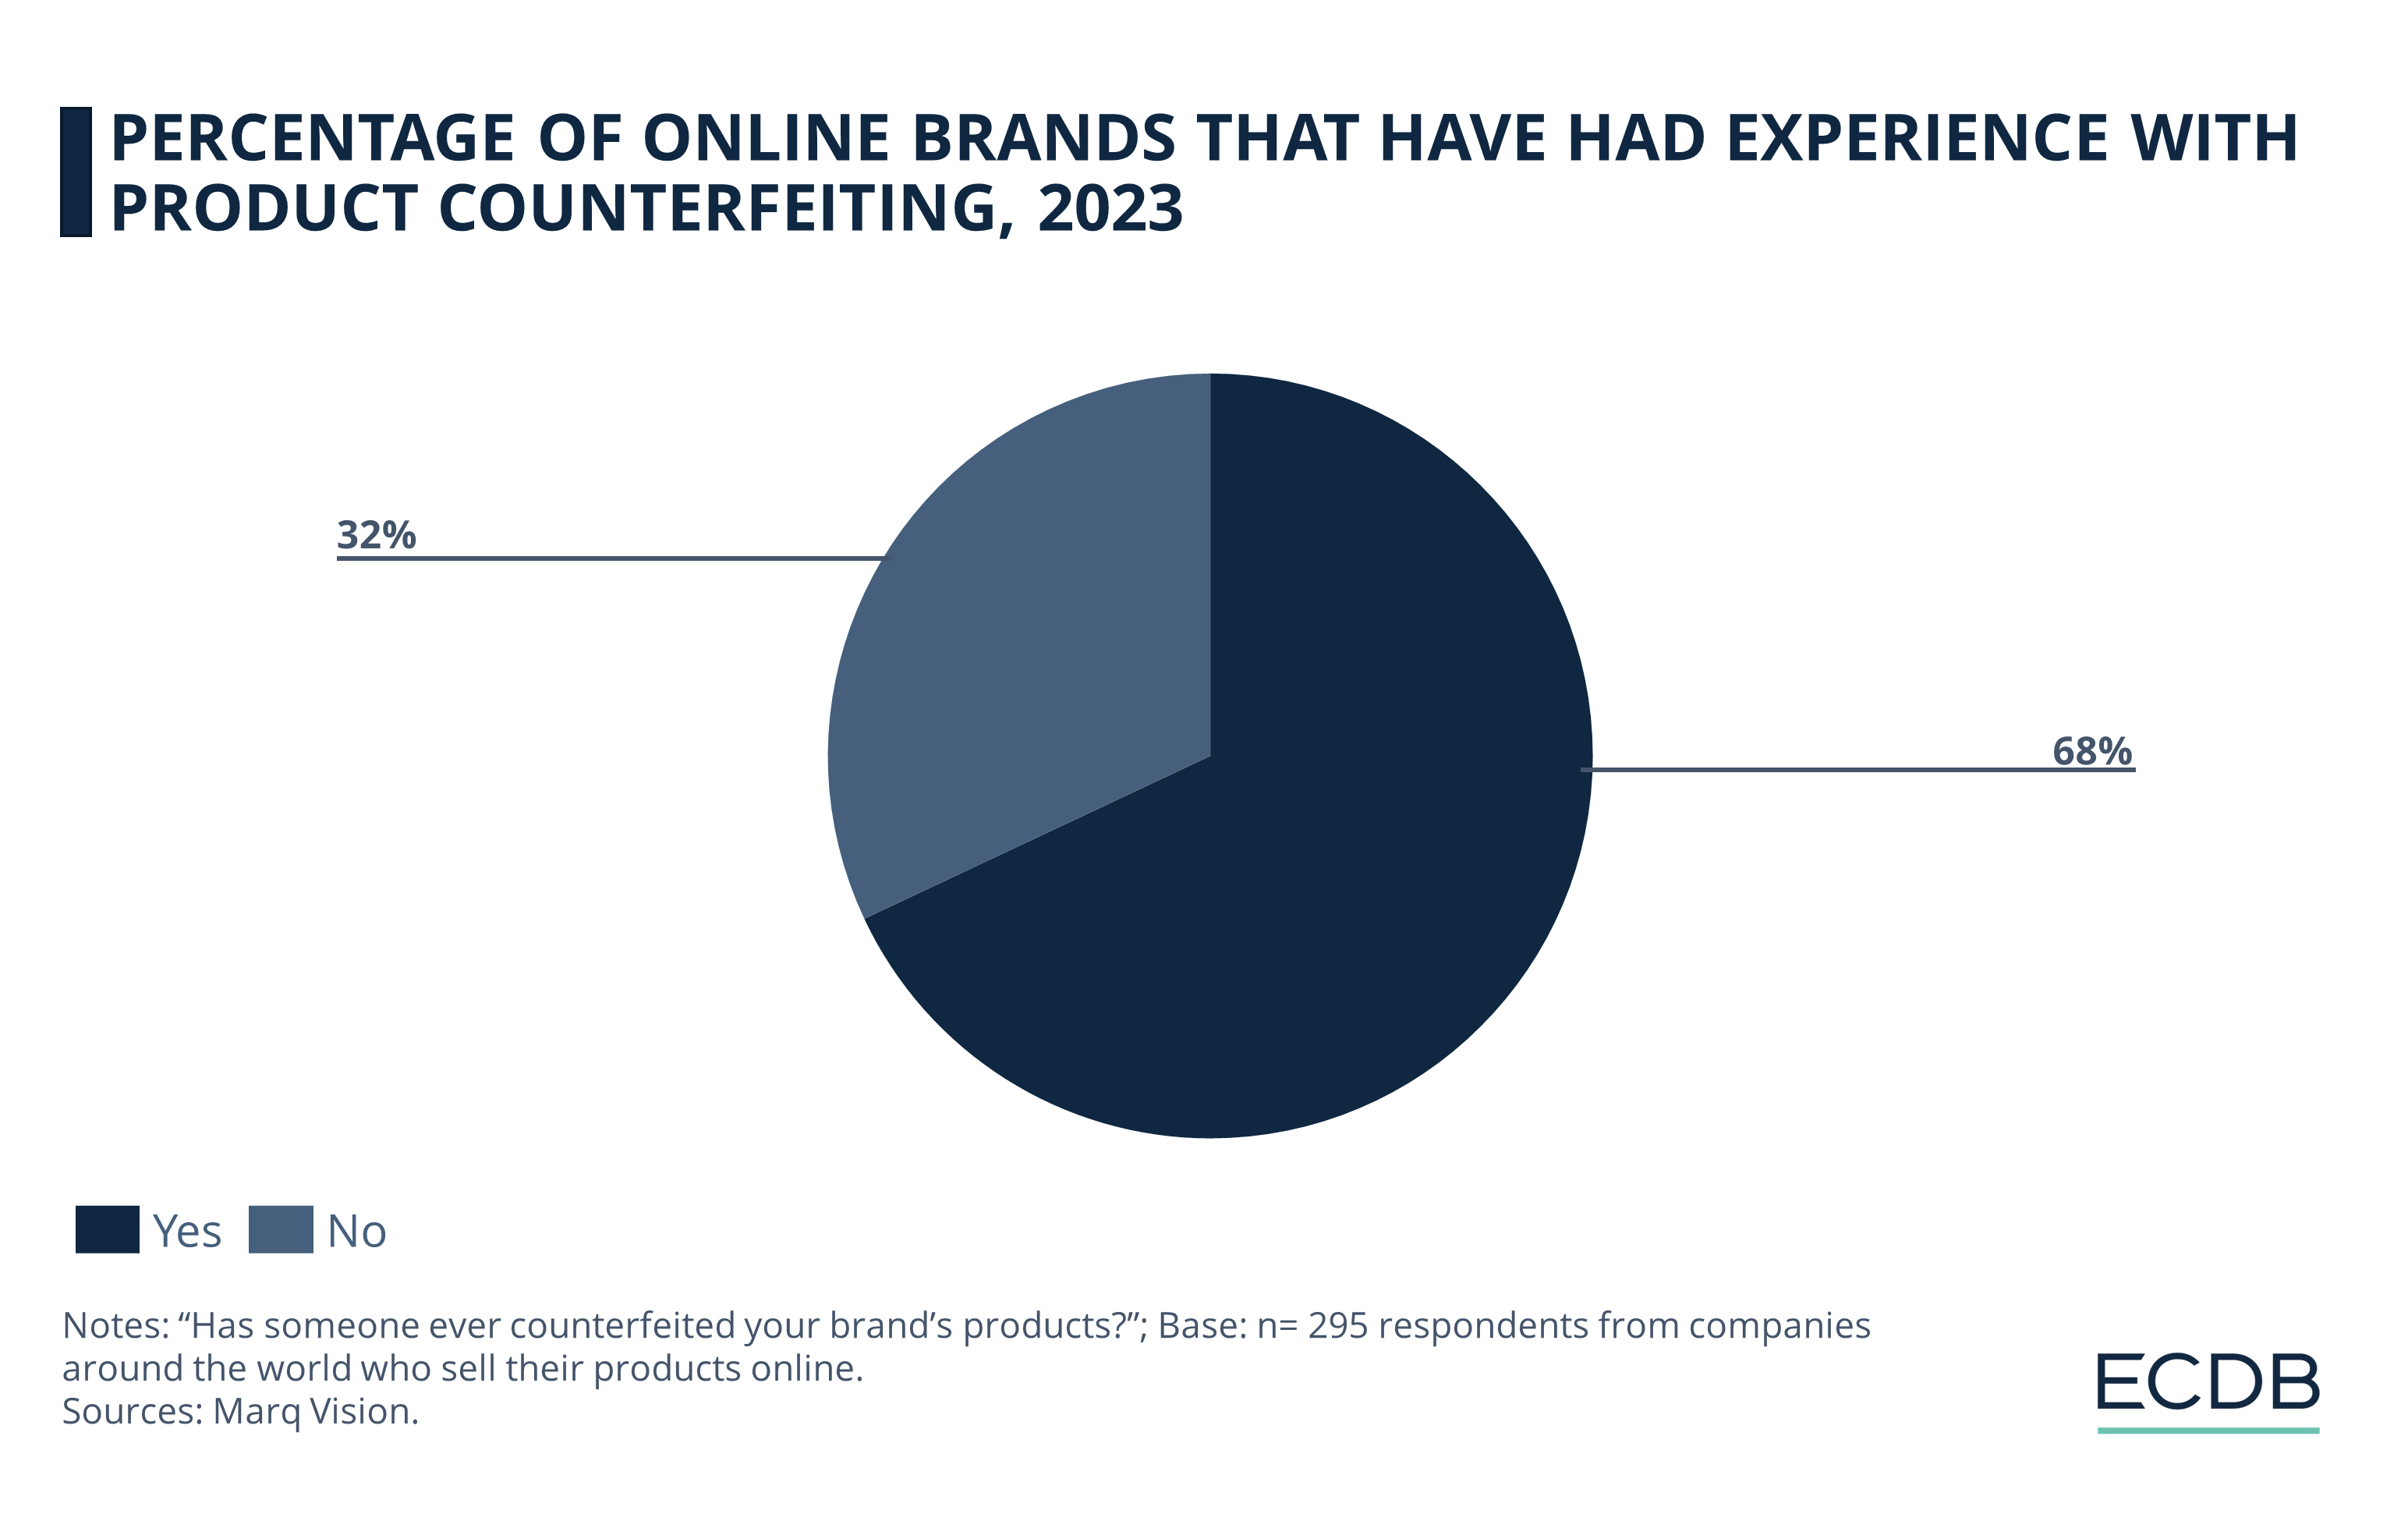 Percentage of Online Brands That Have Had Experience With Product Counterfeiting, 2023